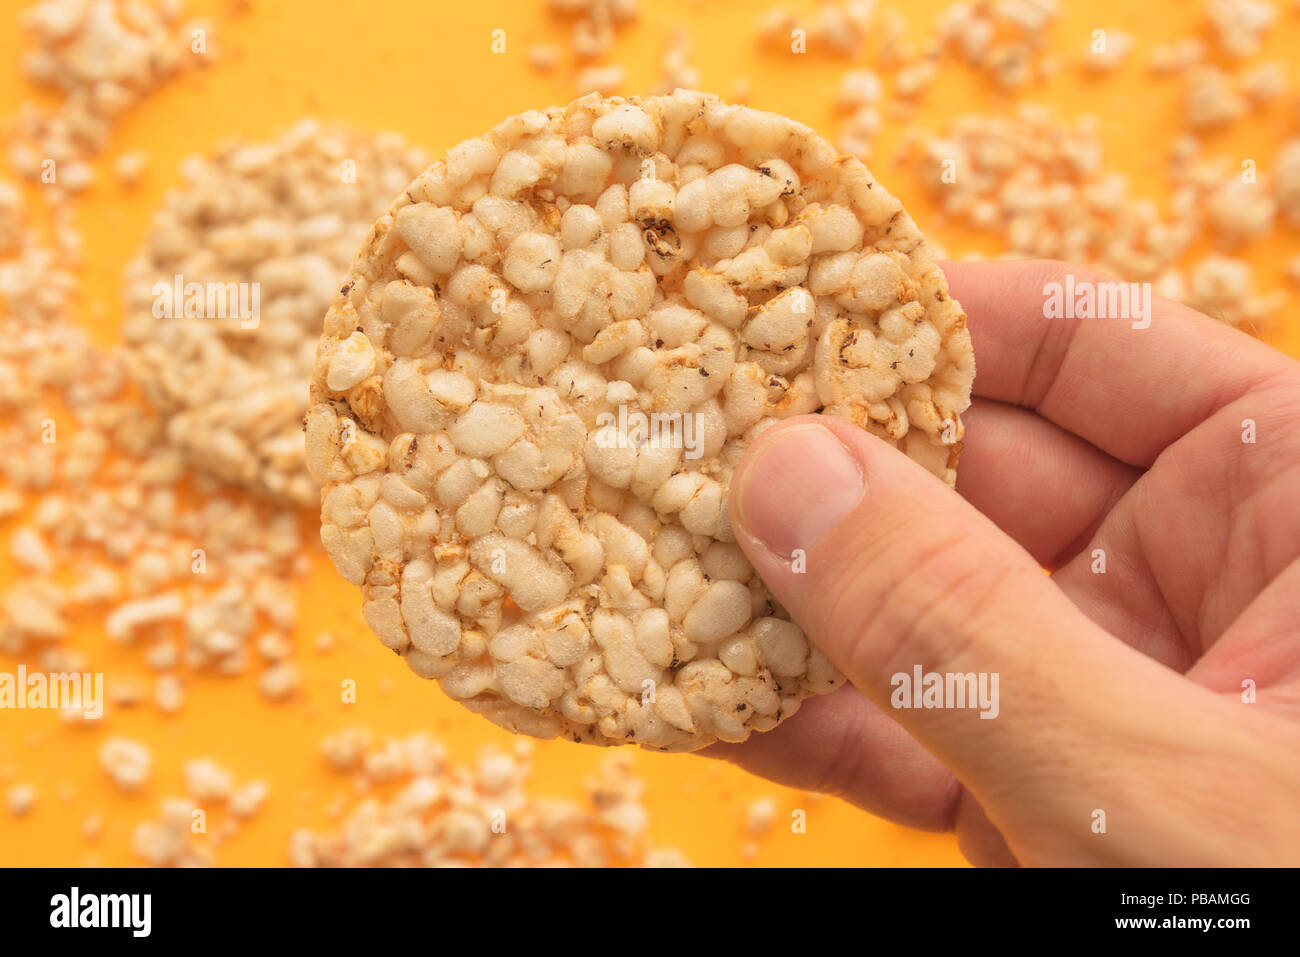 Rice cakes in male hand over yellow background, overhead view Stock Photo